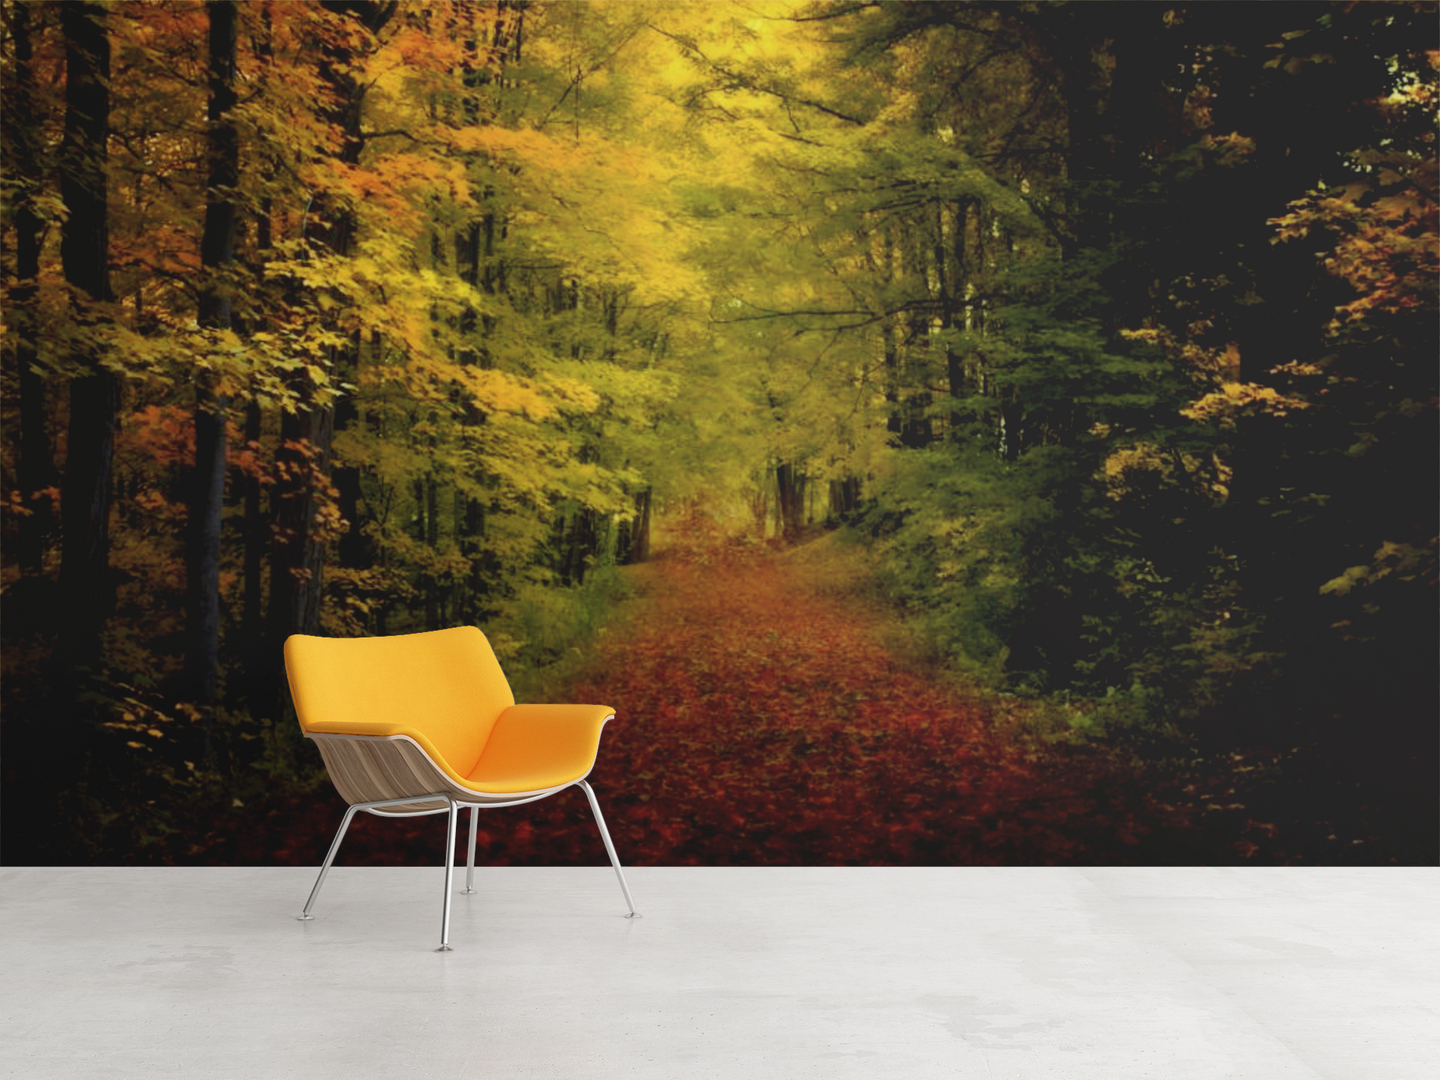 Trail in the Forest  - 02186 - Wall Murals Printing - wall art